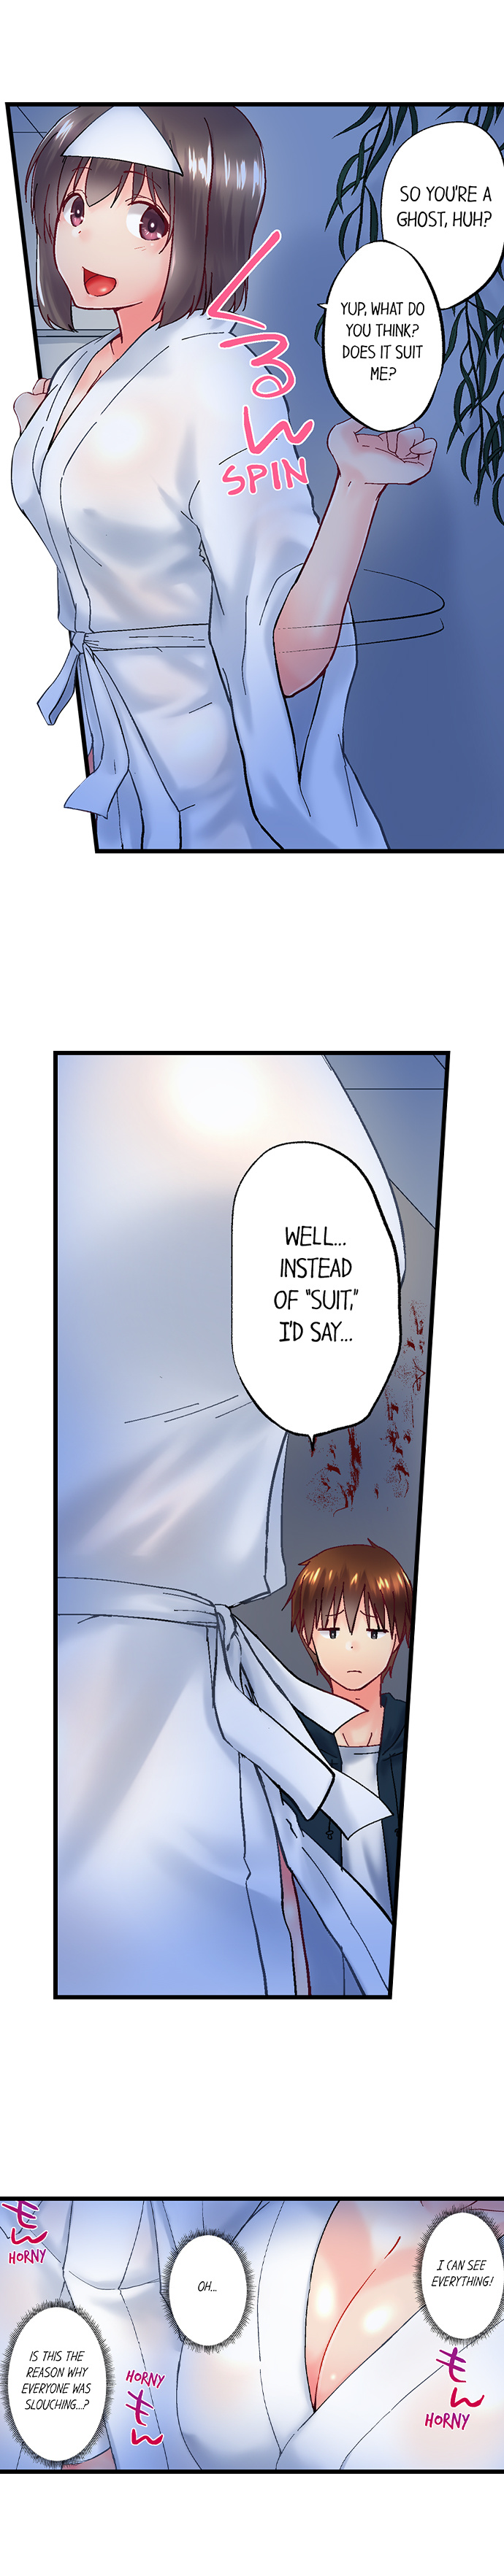 My Brother’s Slipped Inside Me in The Bathtub - Chapter 97 Page 6